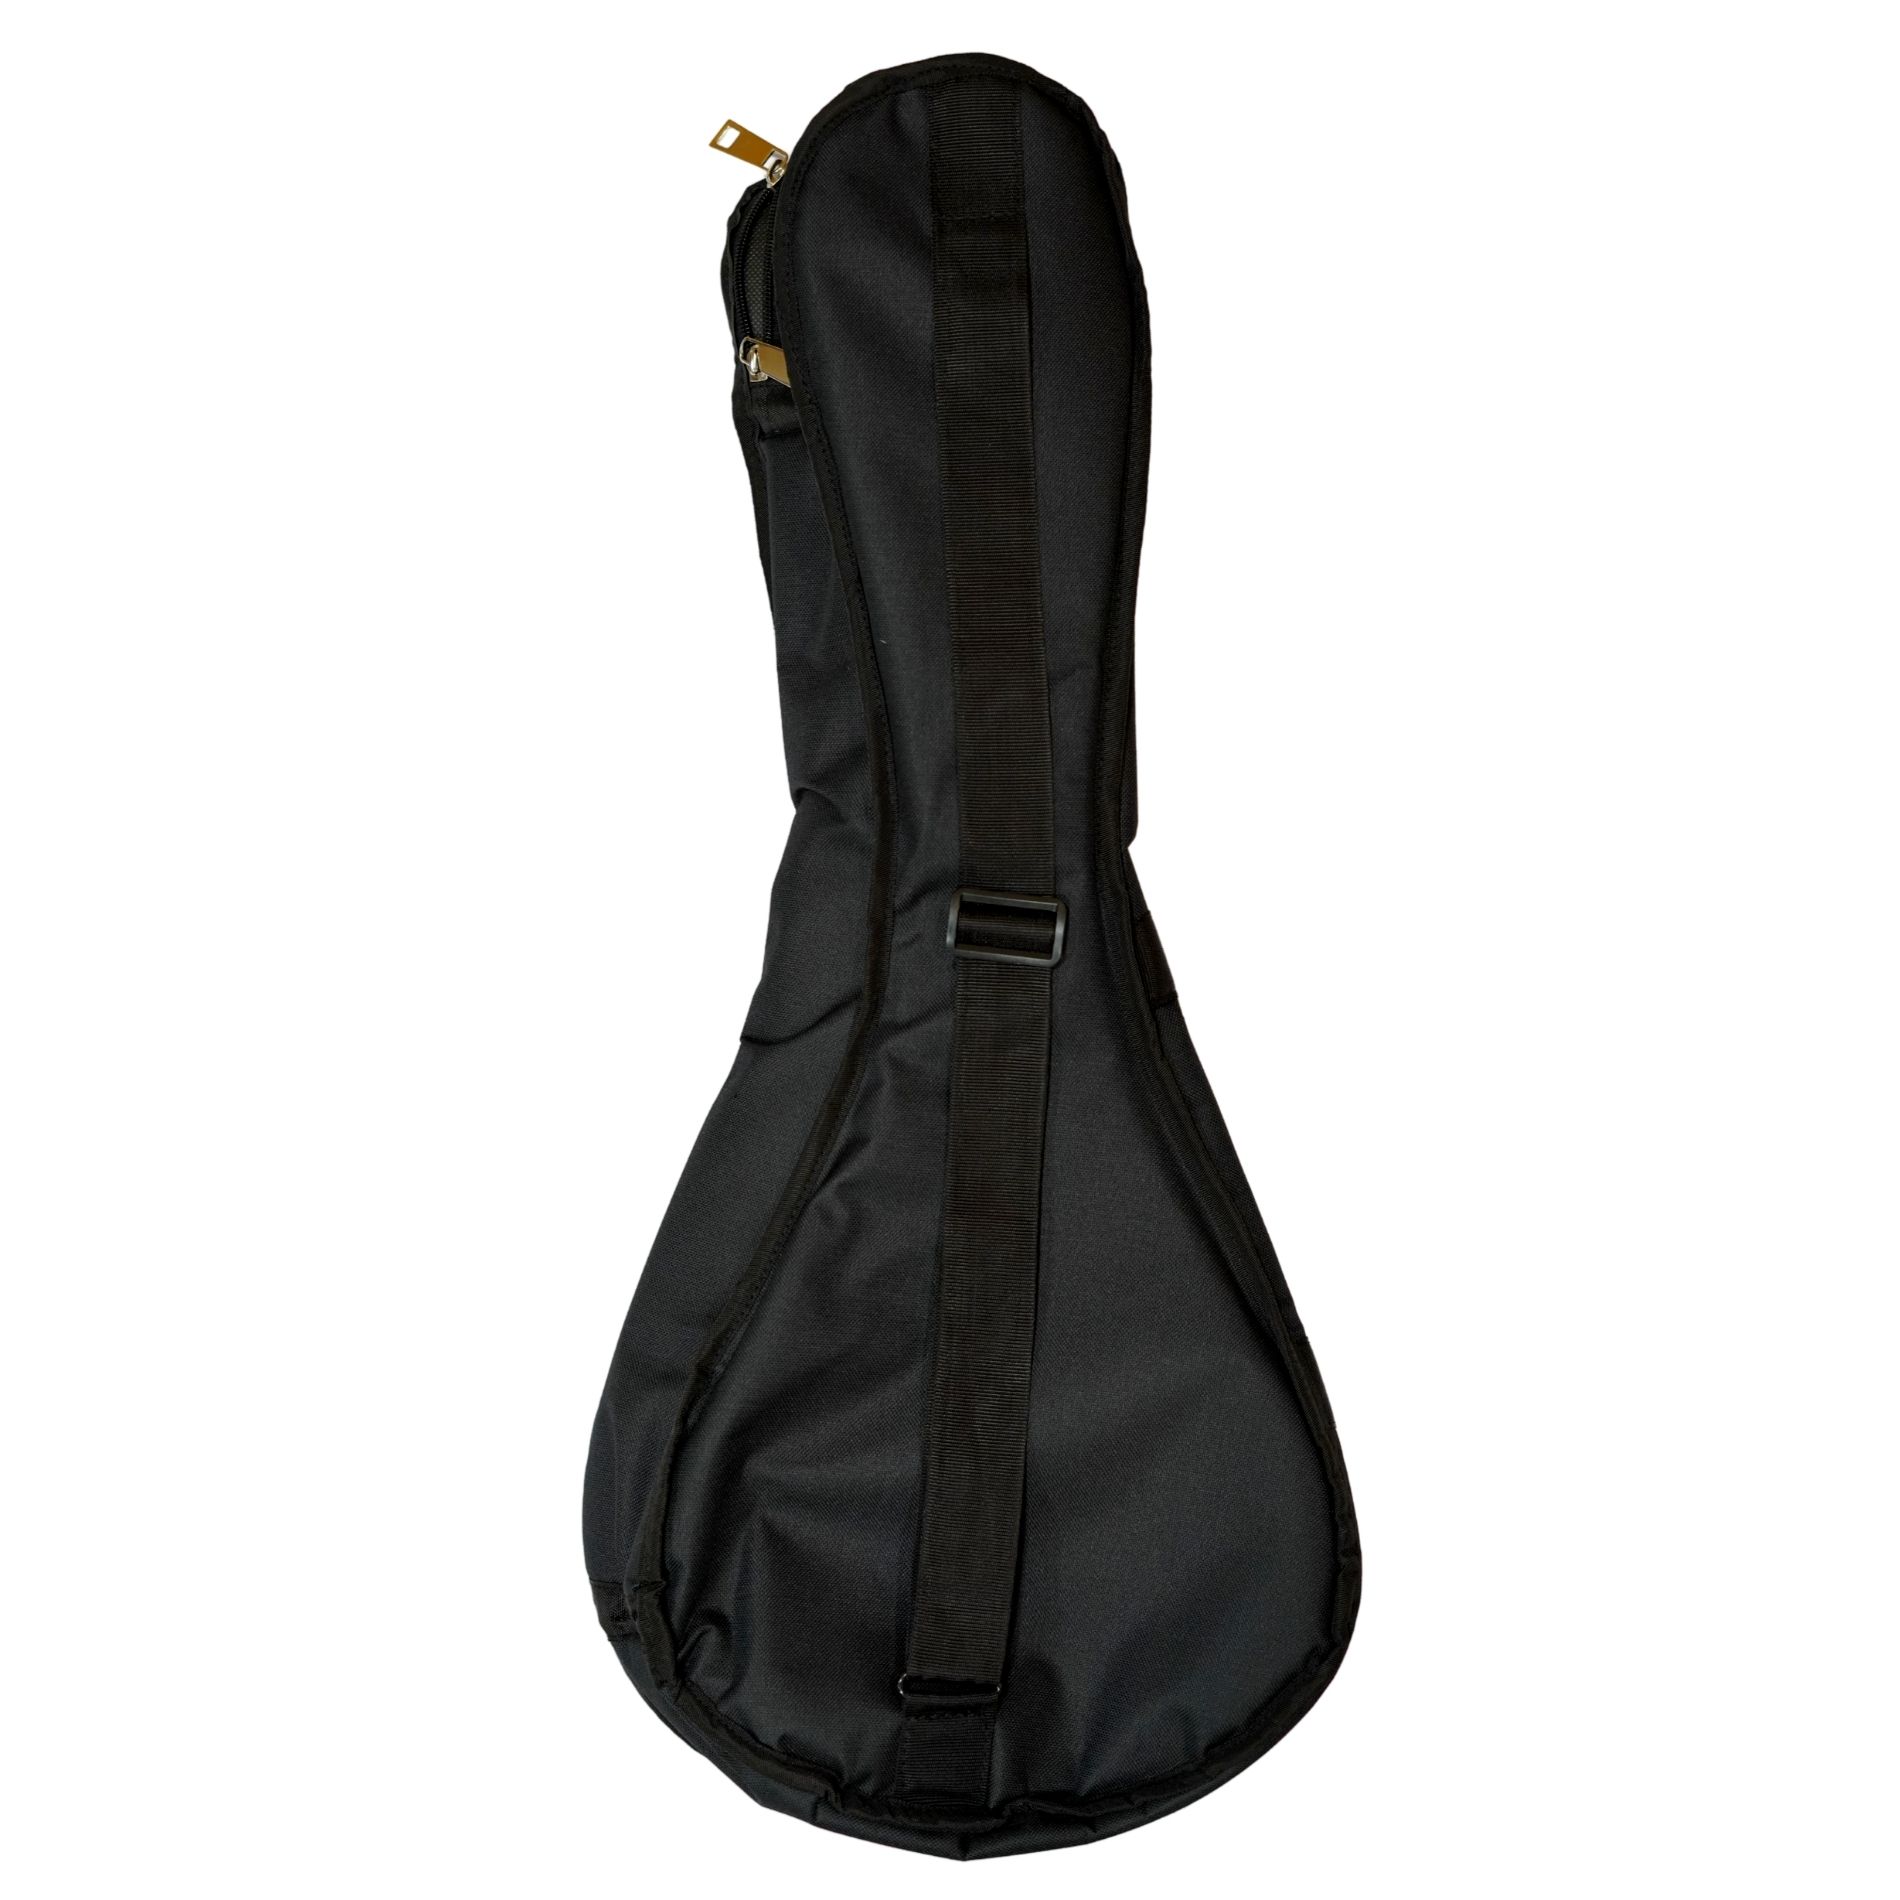 Buy Mandolin Padded Bag and Case online price in india